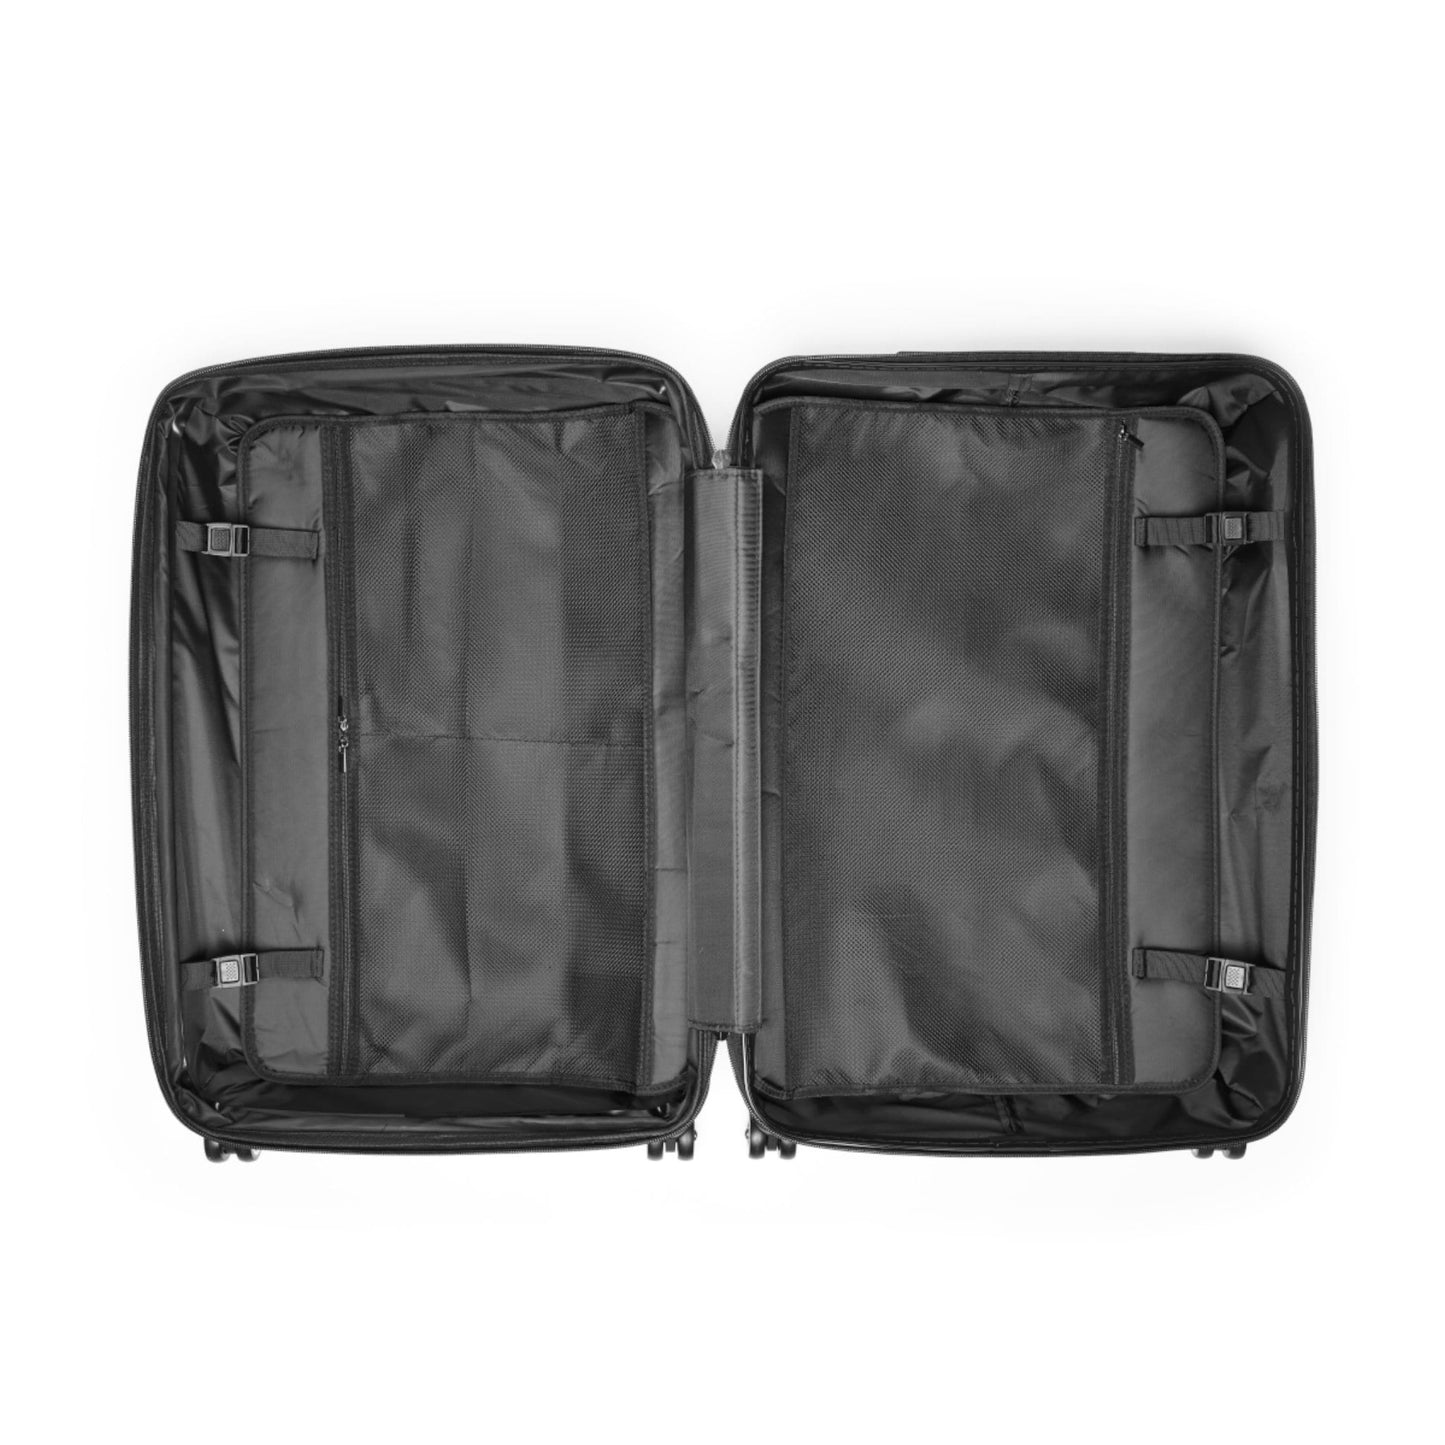 Suitcases - Suitcase - large suitcase - carry on suitcase - luggage - airport - suitcase with wheels -